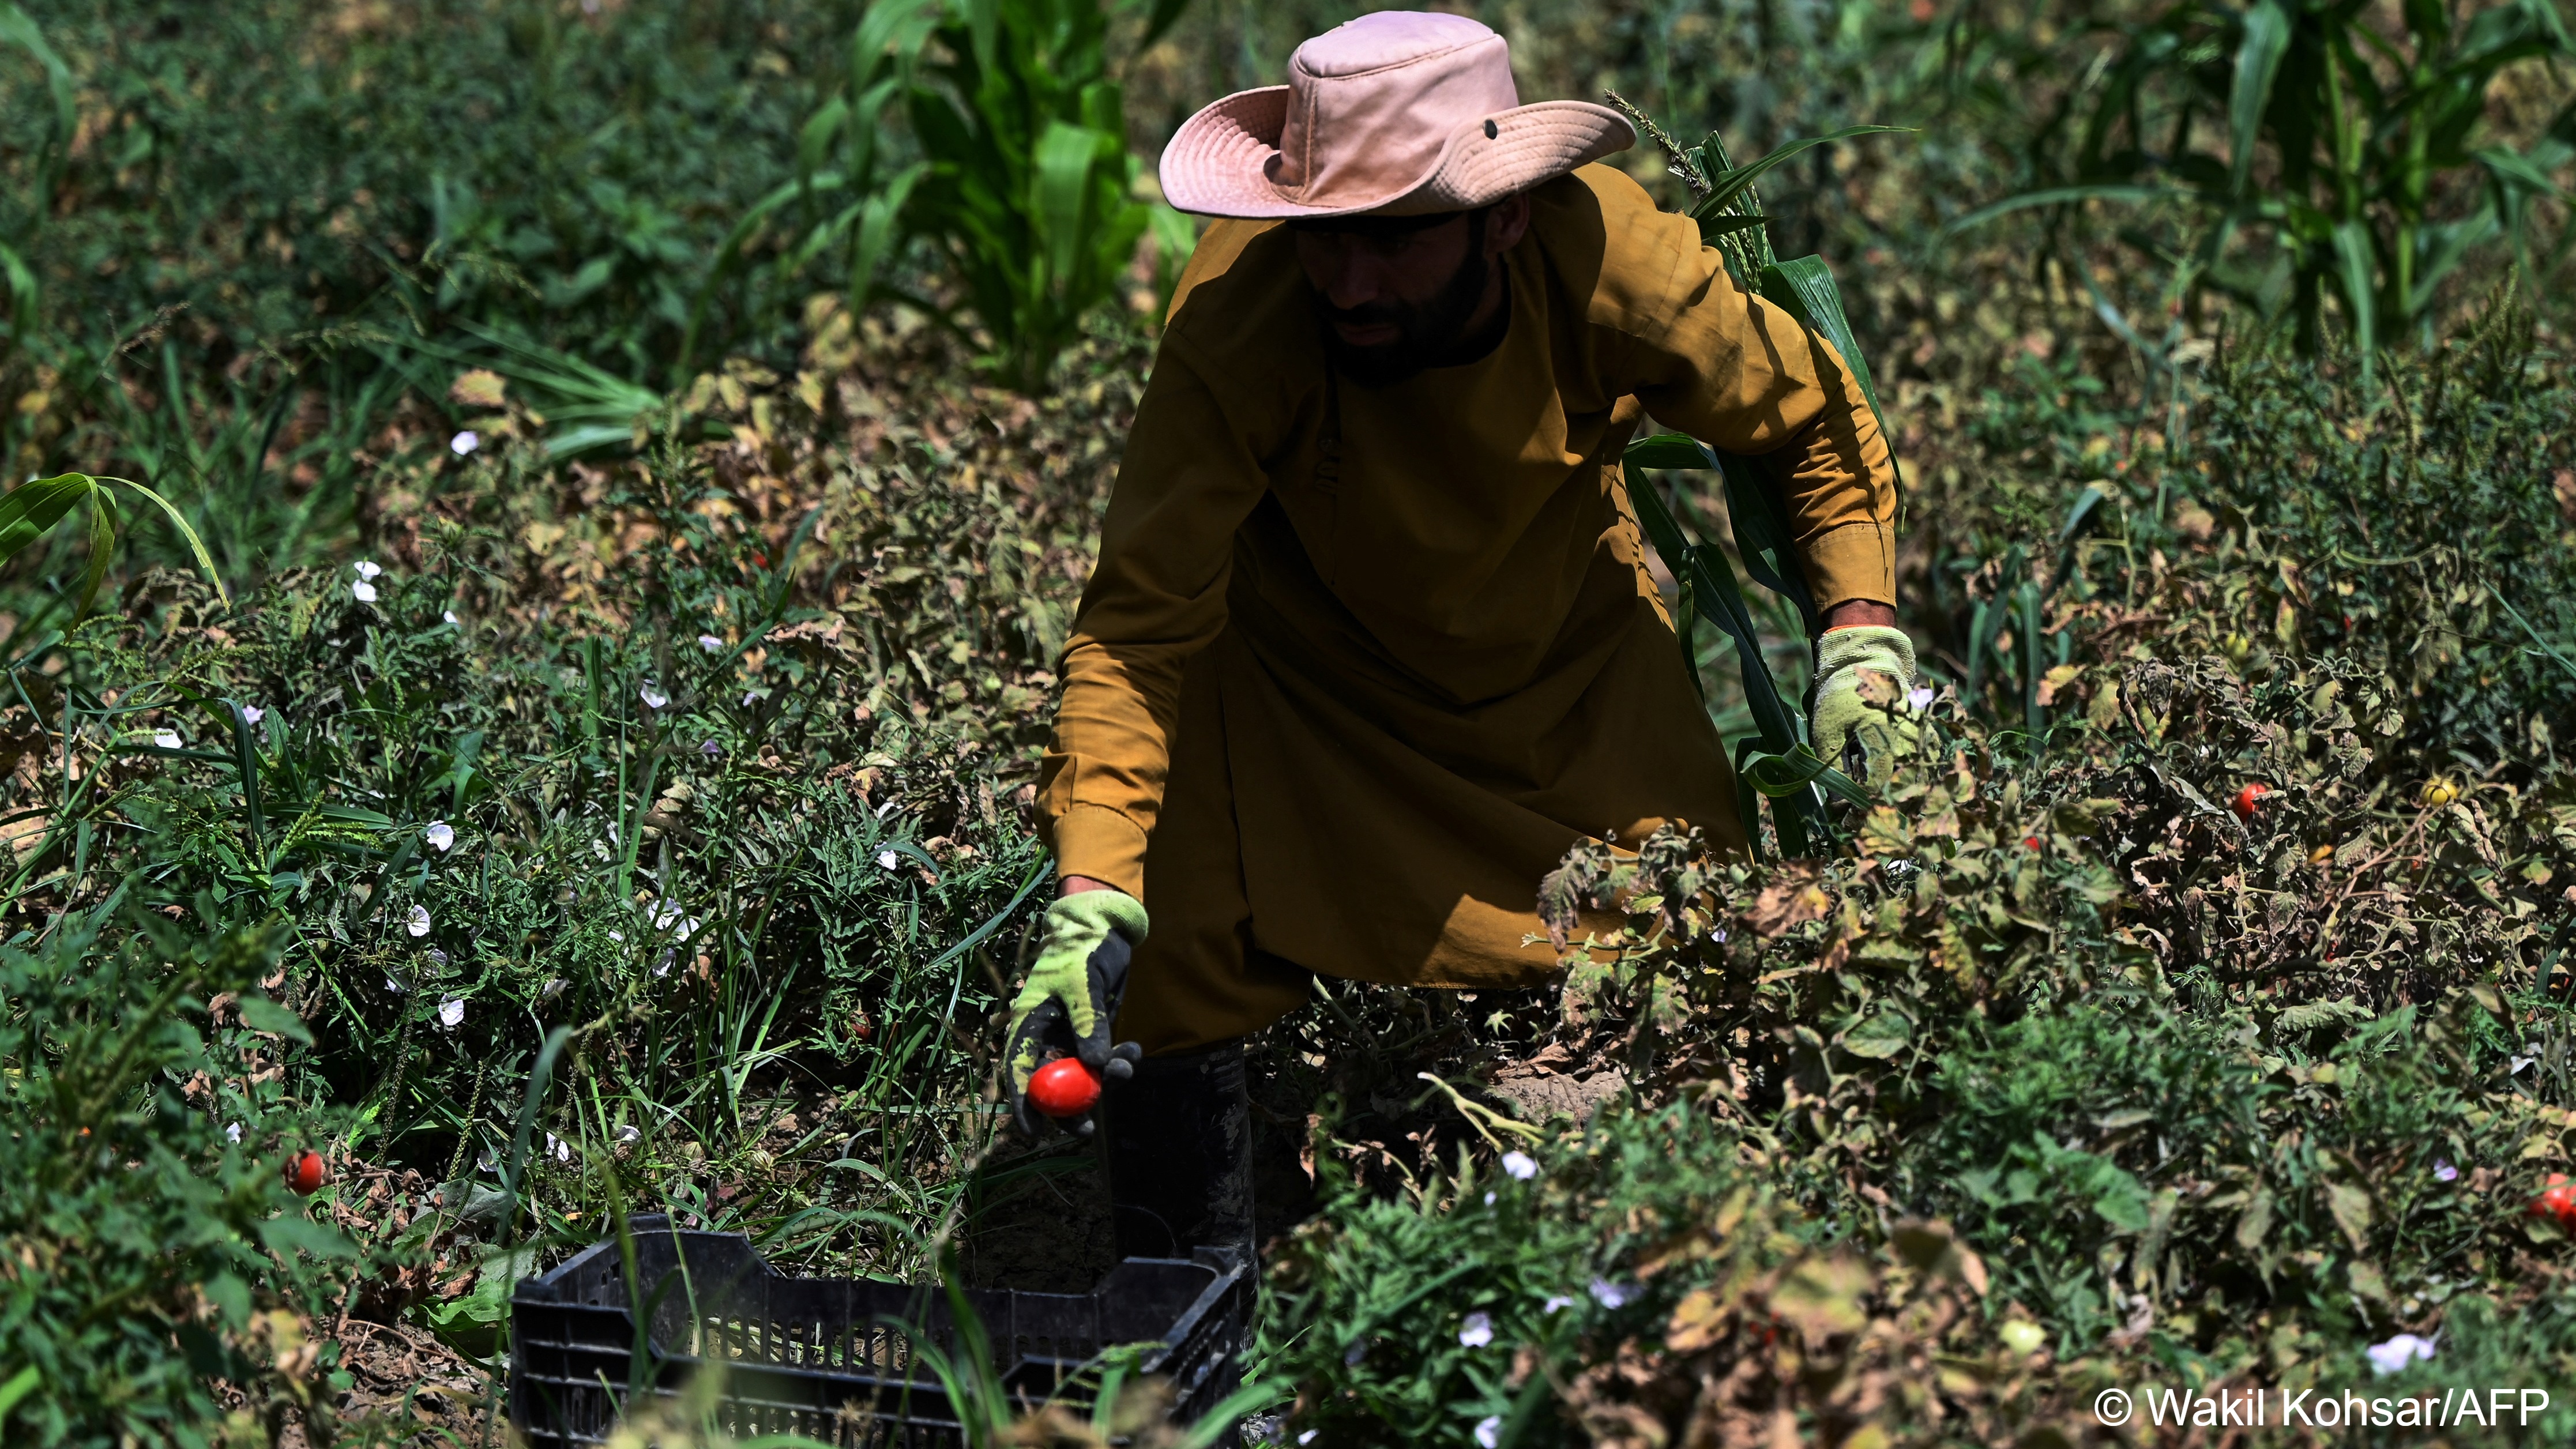 Afghan farmer Rahatullah Azizi harvests tomatoes at a field in Tilanchi village of Parwan province on 3 August 2023 (image: Wakil Kohsar/AFP)